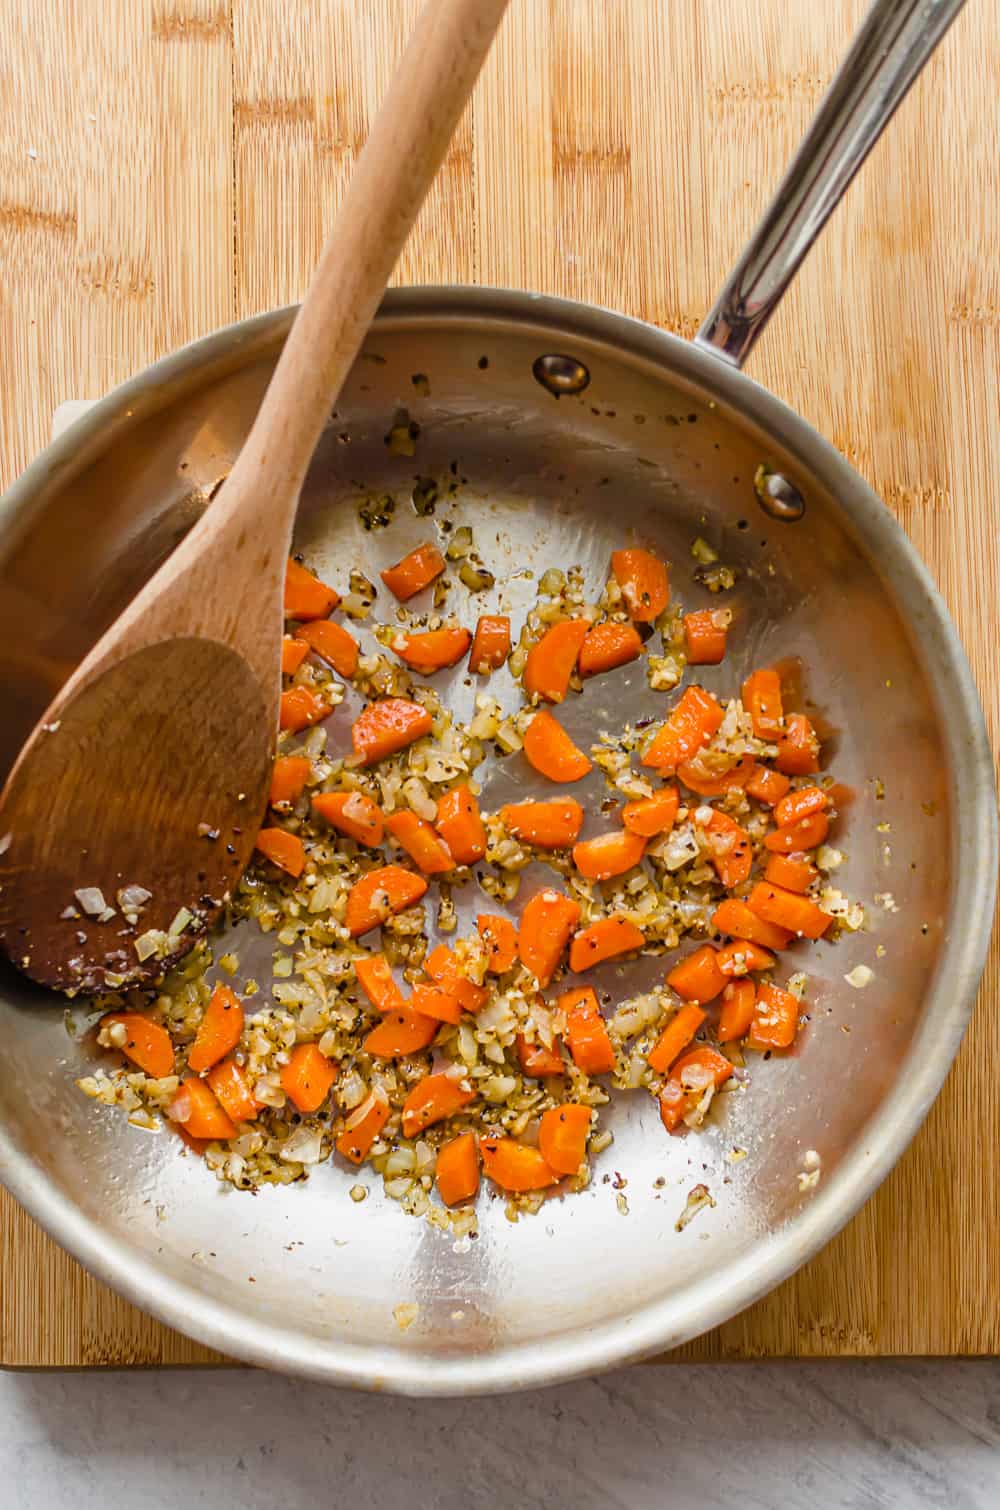 Sauteed onions, carrots, and garlic in a a stainless steel frying pan.